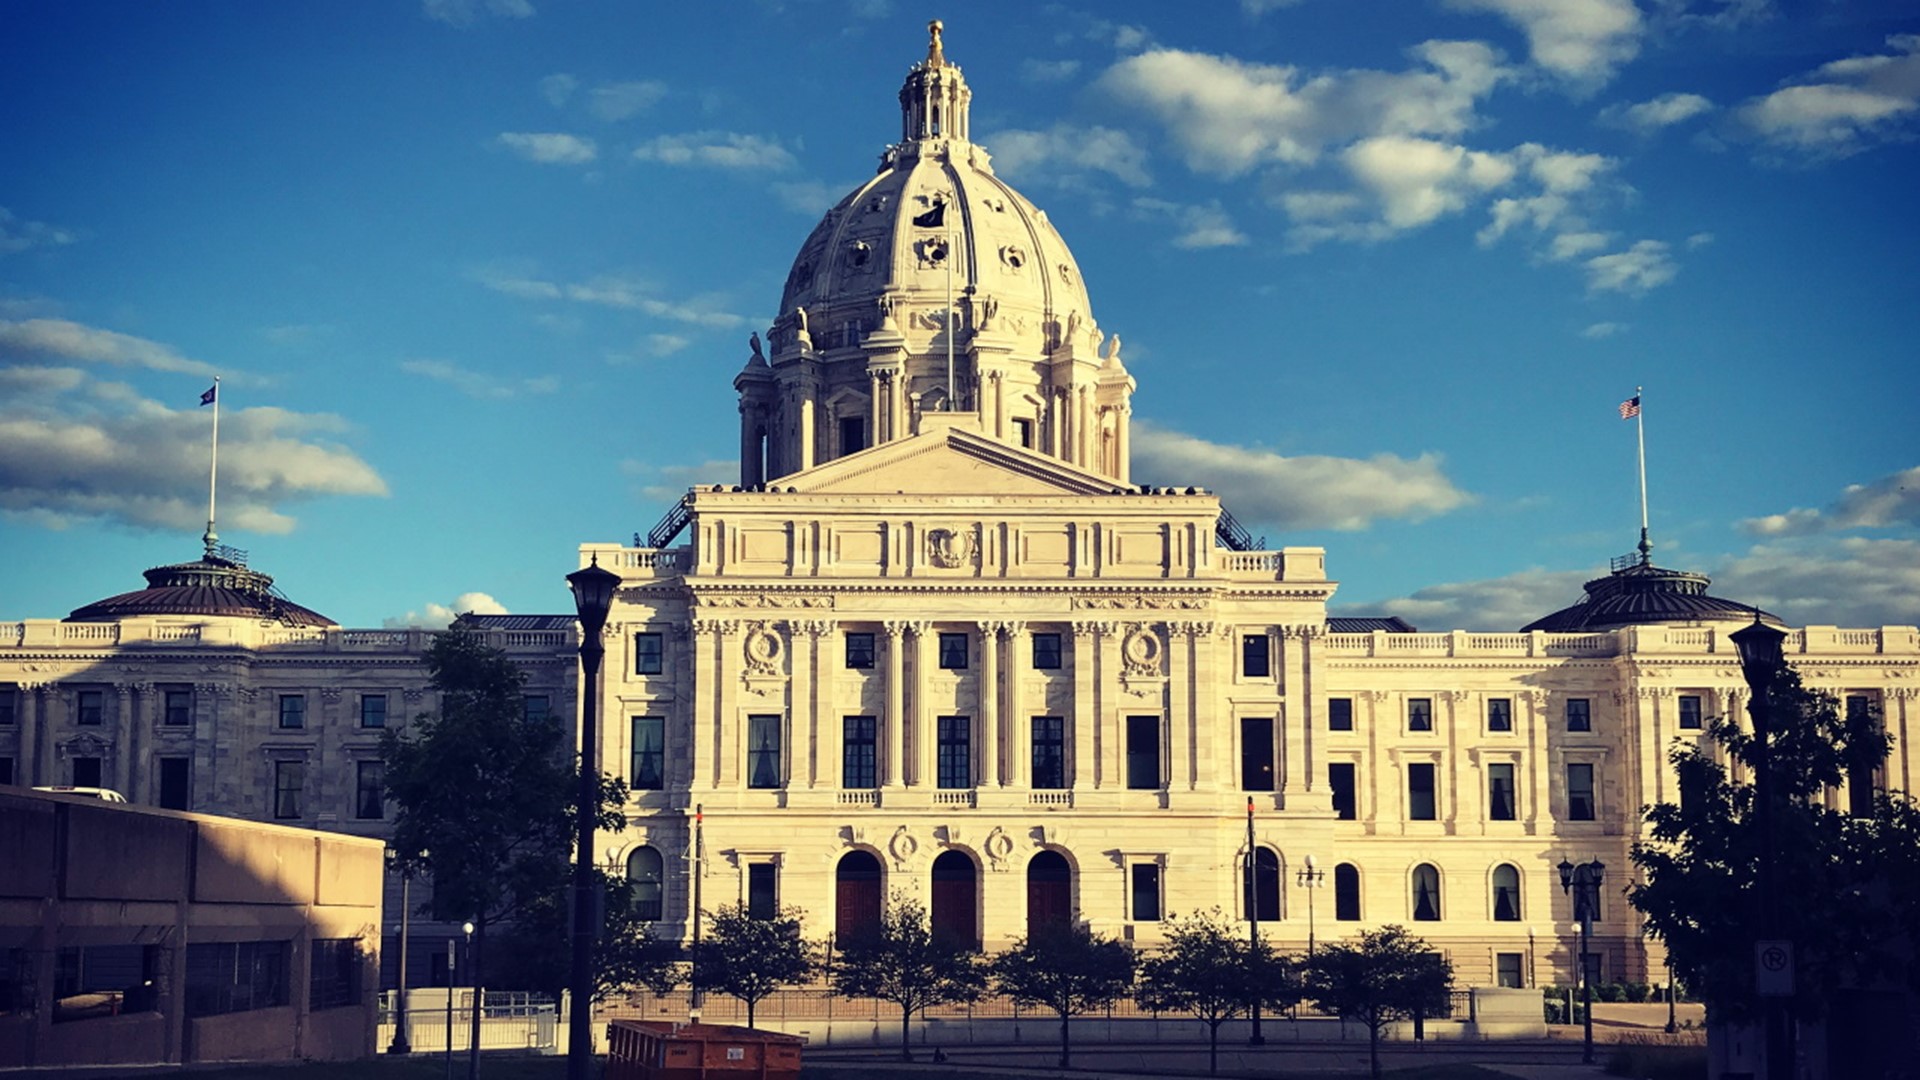 If you received unemployment in 2020 you'll likely get money back from the Minnesota Department of Revenue.